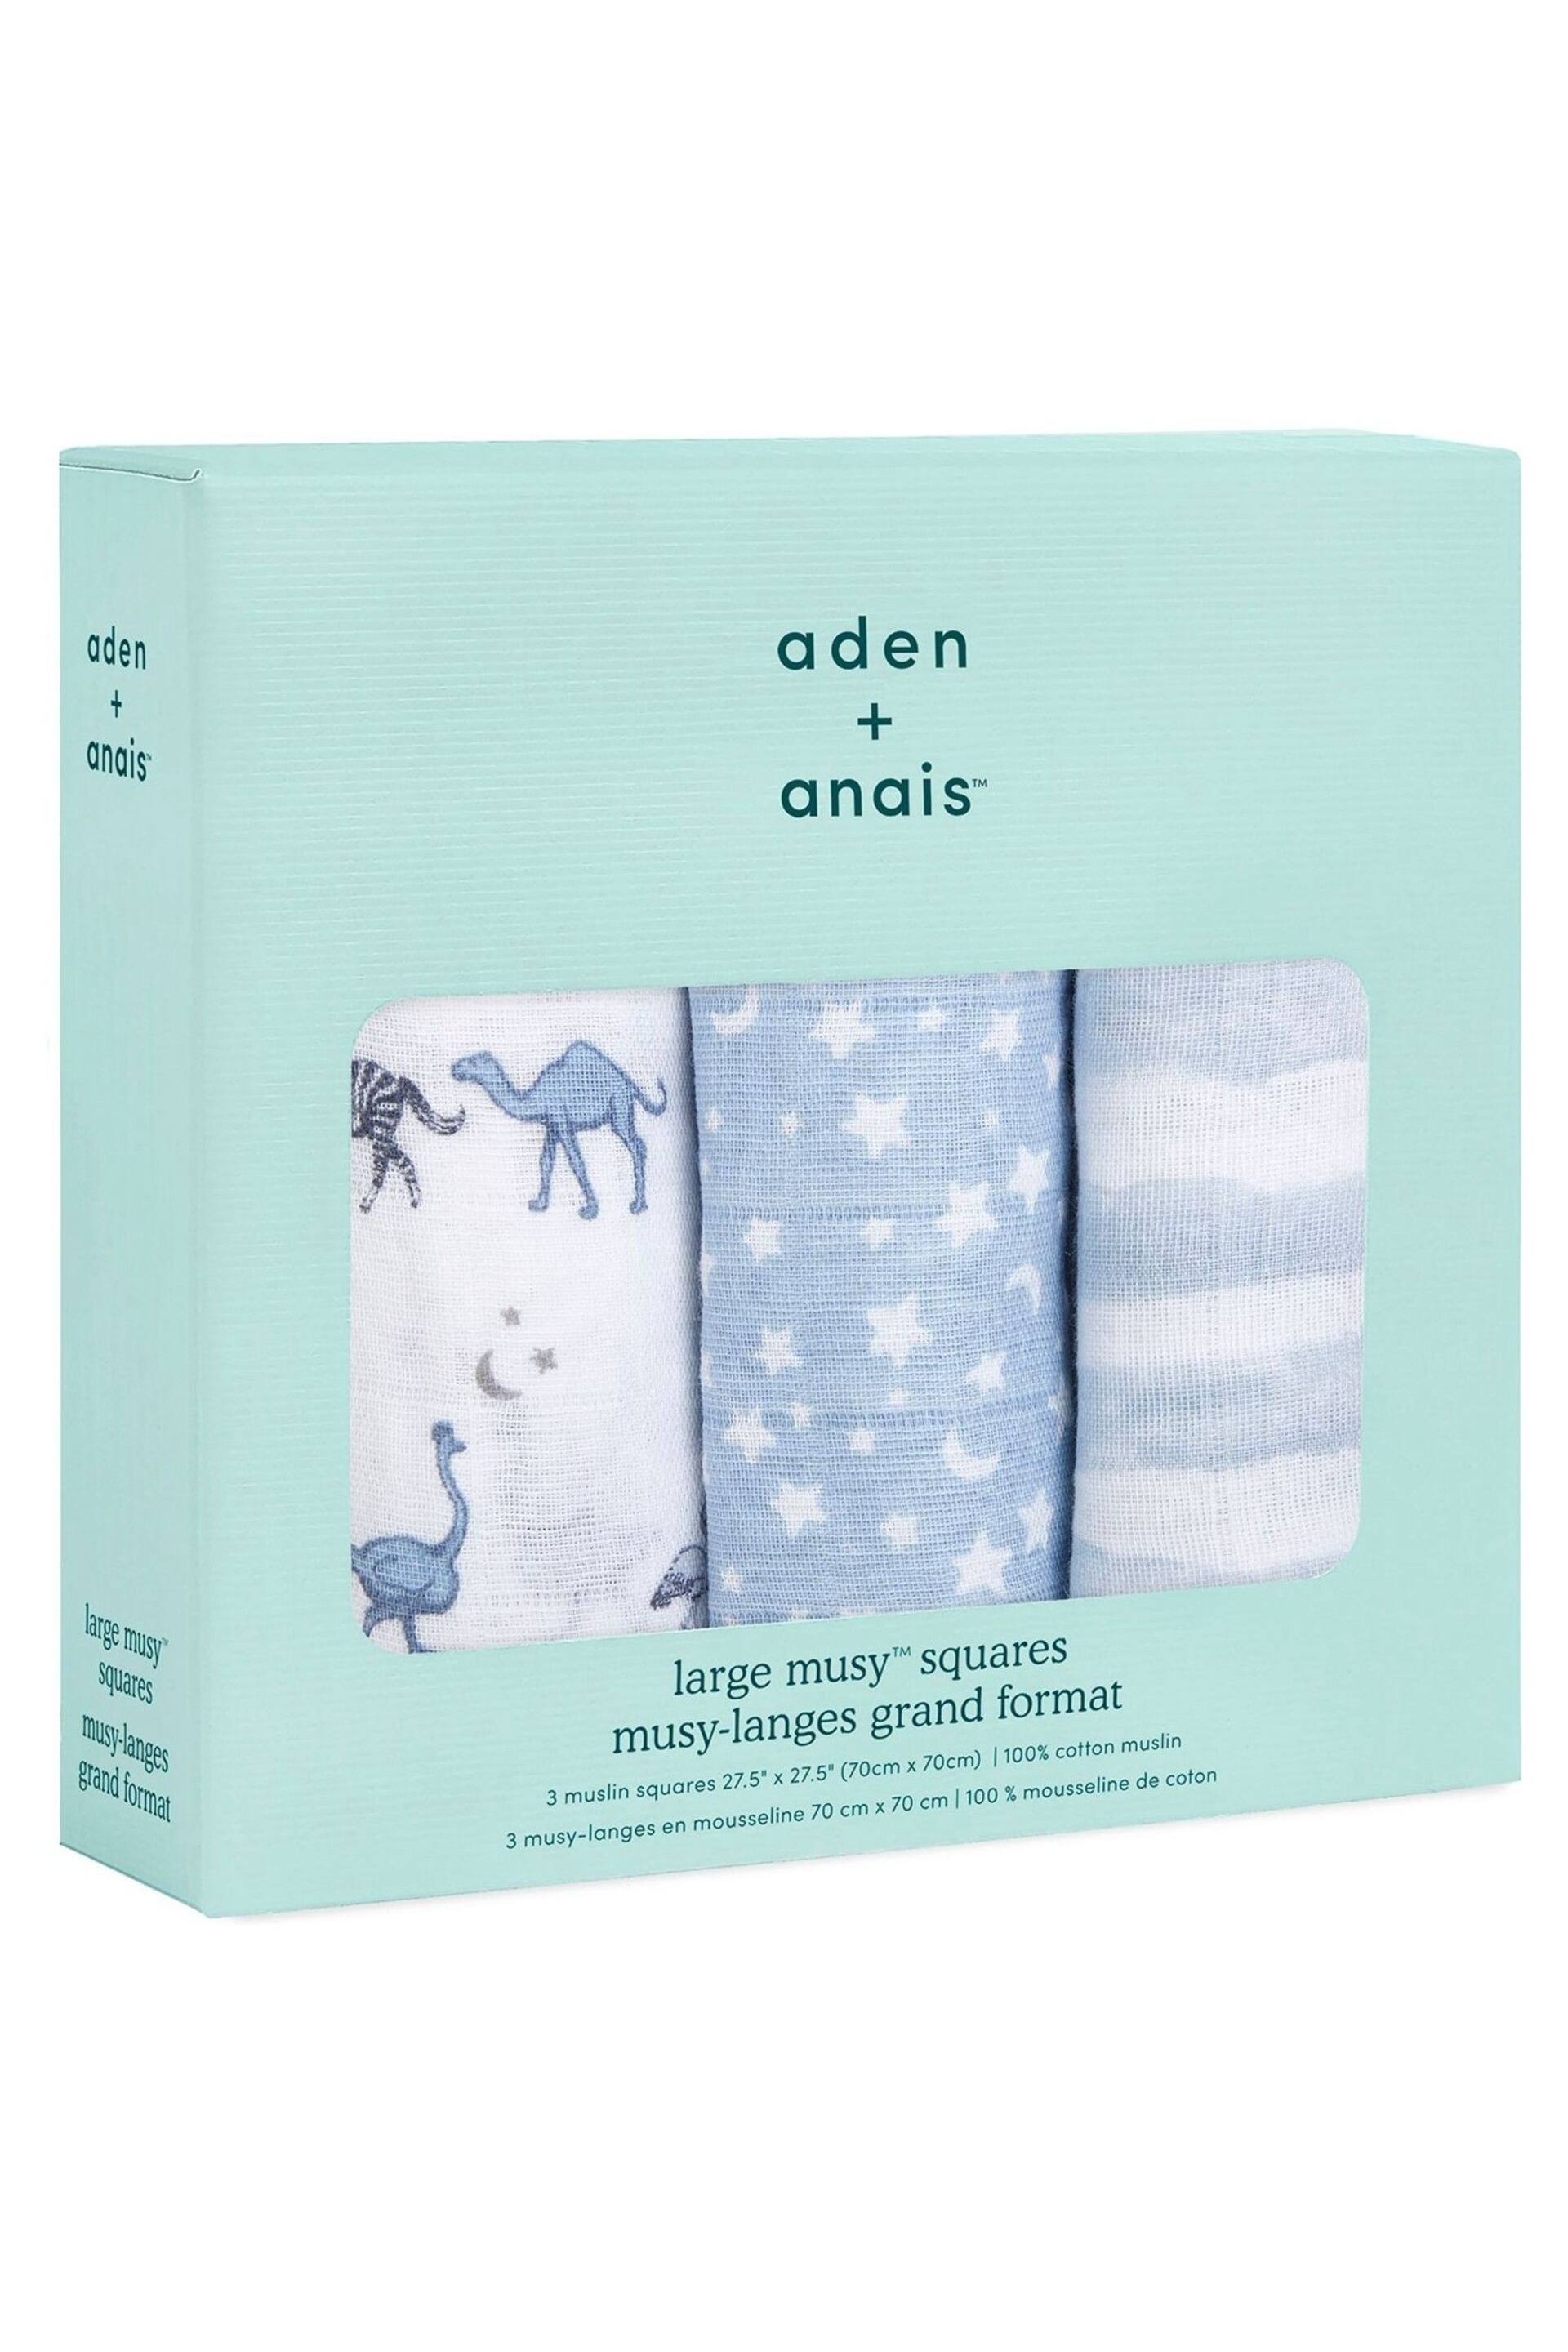 aden + anais Cotton Muslin Squares 3 Pack - Image 1 of 4